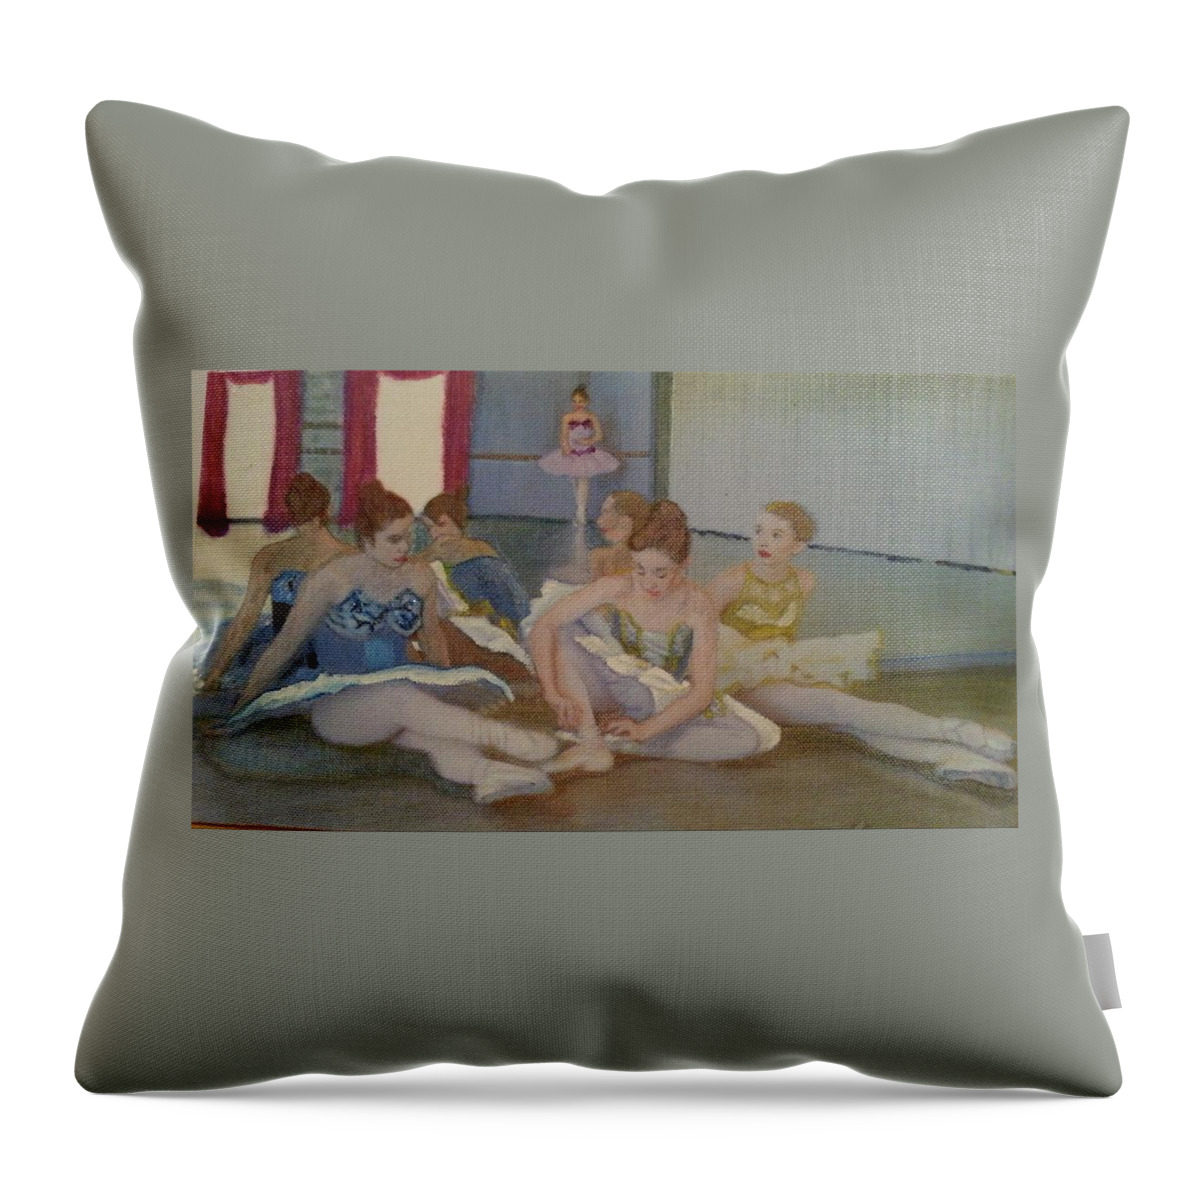 Dance Theme Throw Pillow featuring the mixed media Dancers Take Five by Pamela Smale Williams